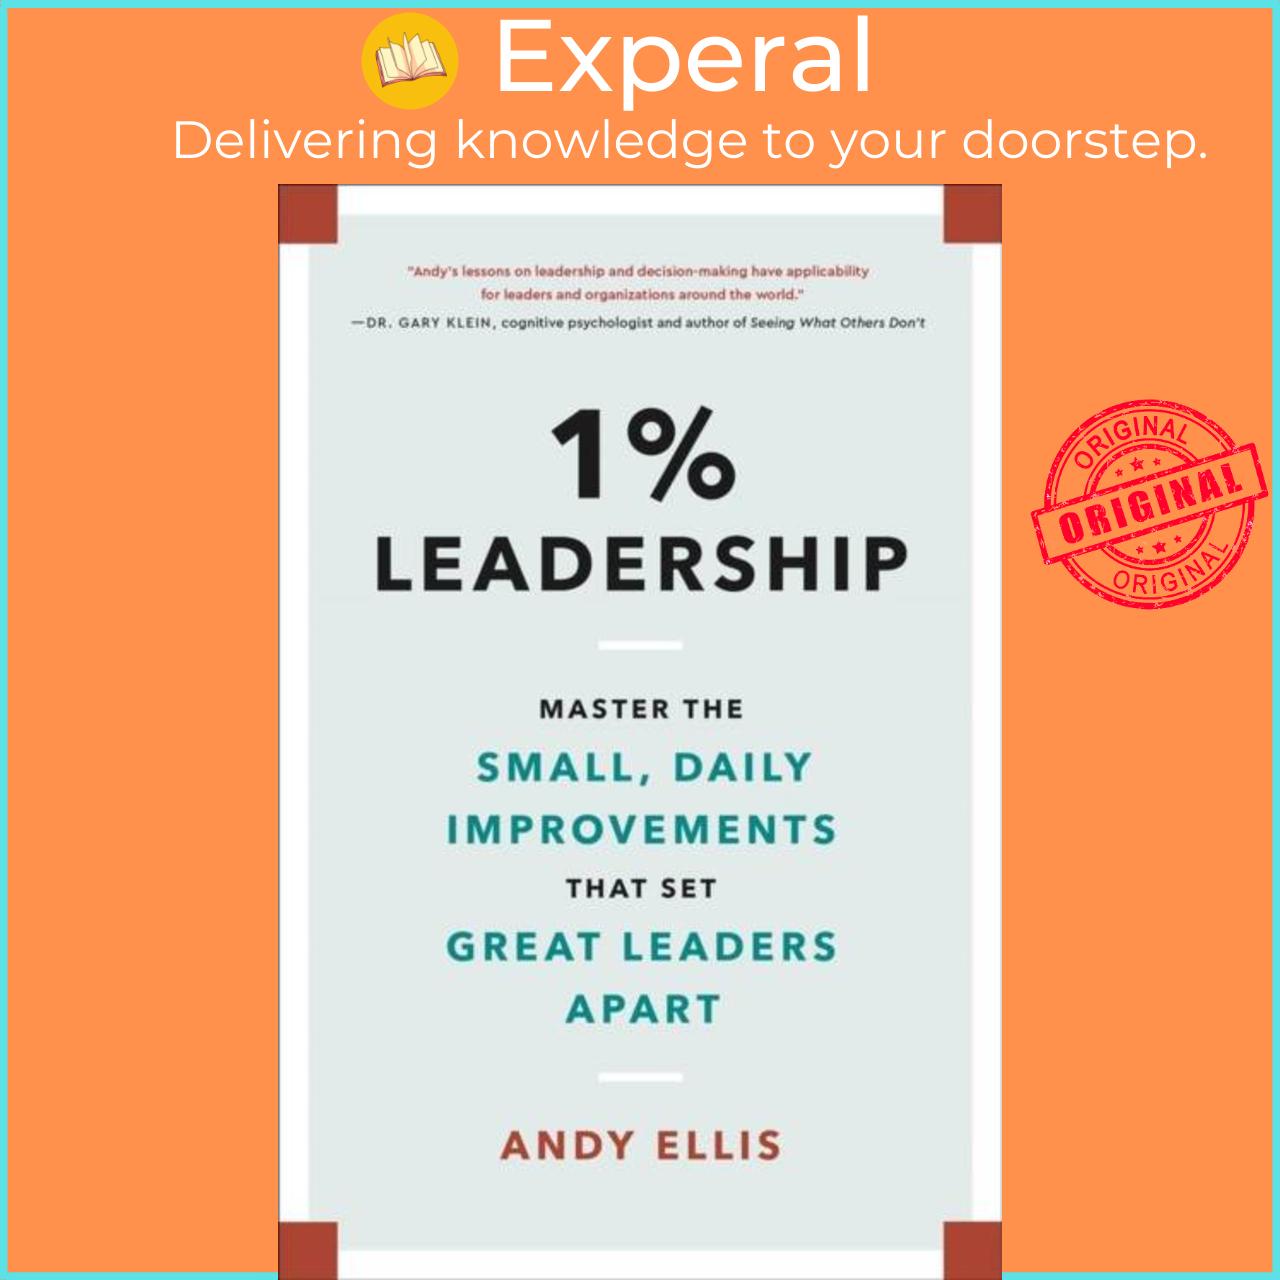 Sách - 1% Leadership - Master the Small, Daily Improvements that Set Great Leaders by Andy Ellis (UK edition, hardcover)